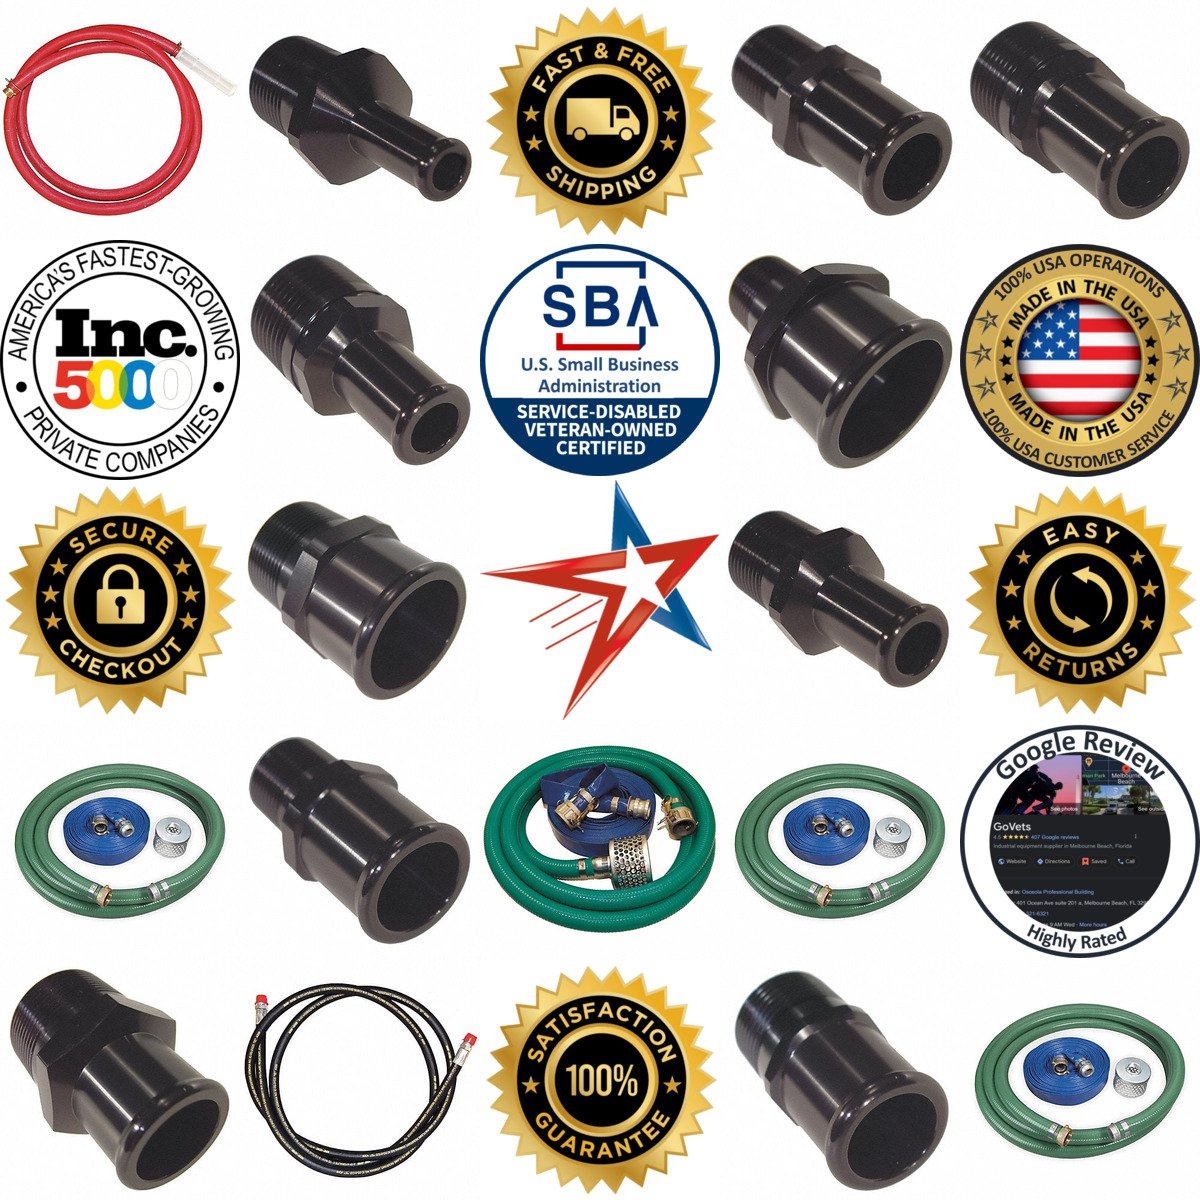 A selection of Centrifugal Pump Hose and Hose Fitting Kits products on GoVets